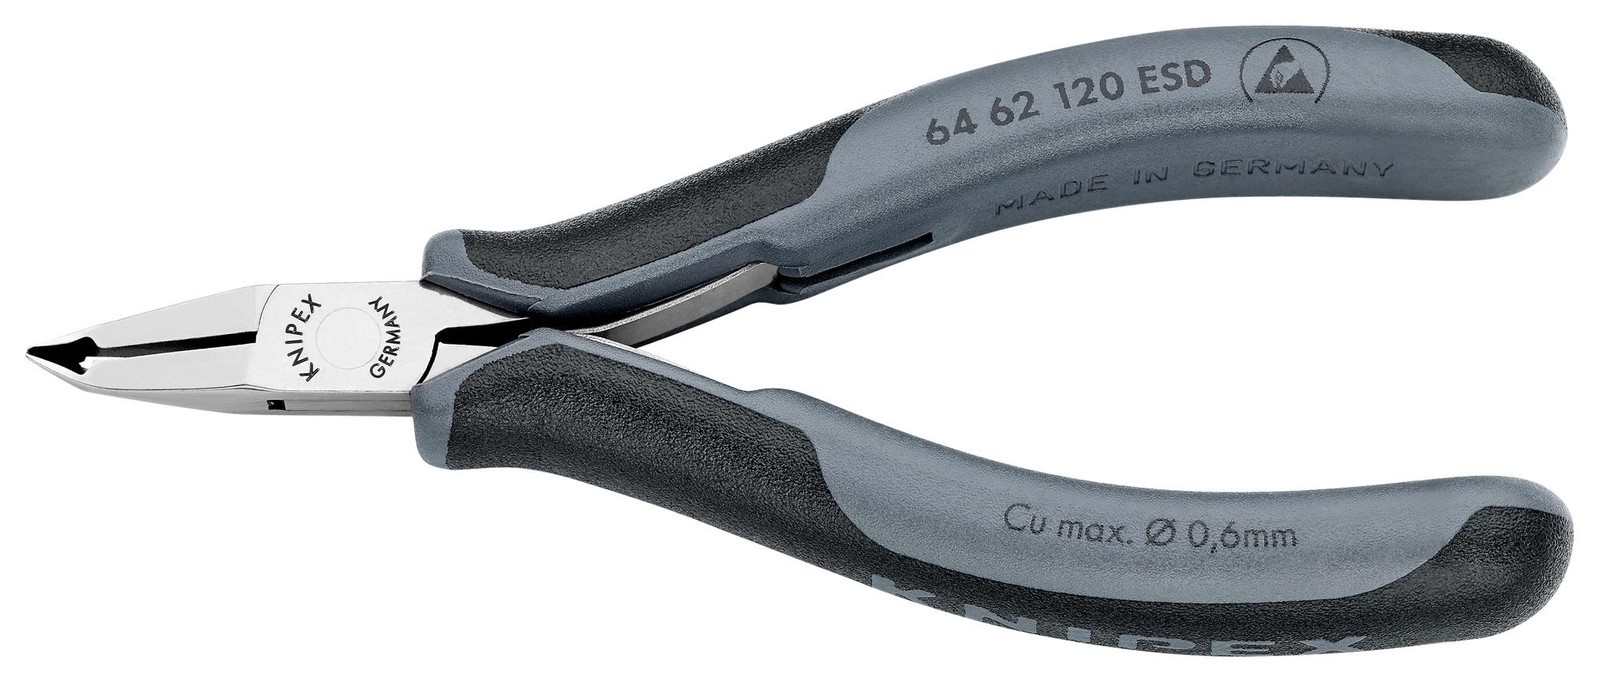 Knipex 64 62 120 Esd Oblique Cutting NIppers